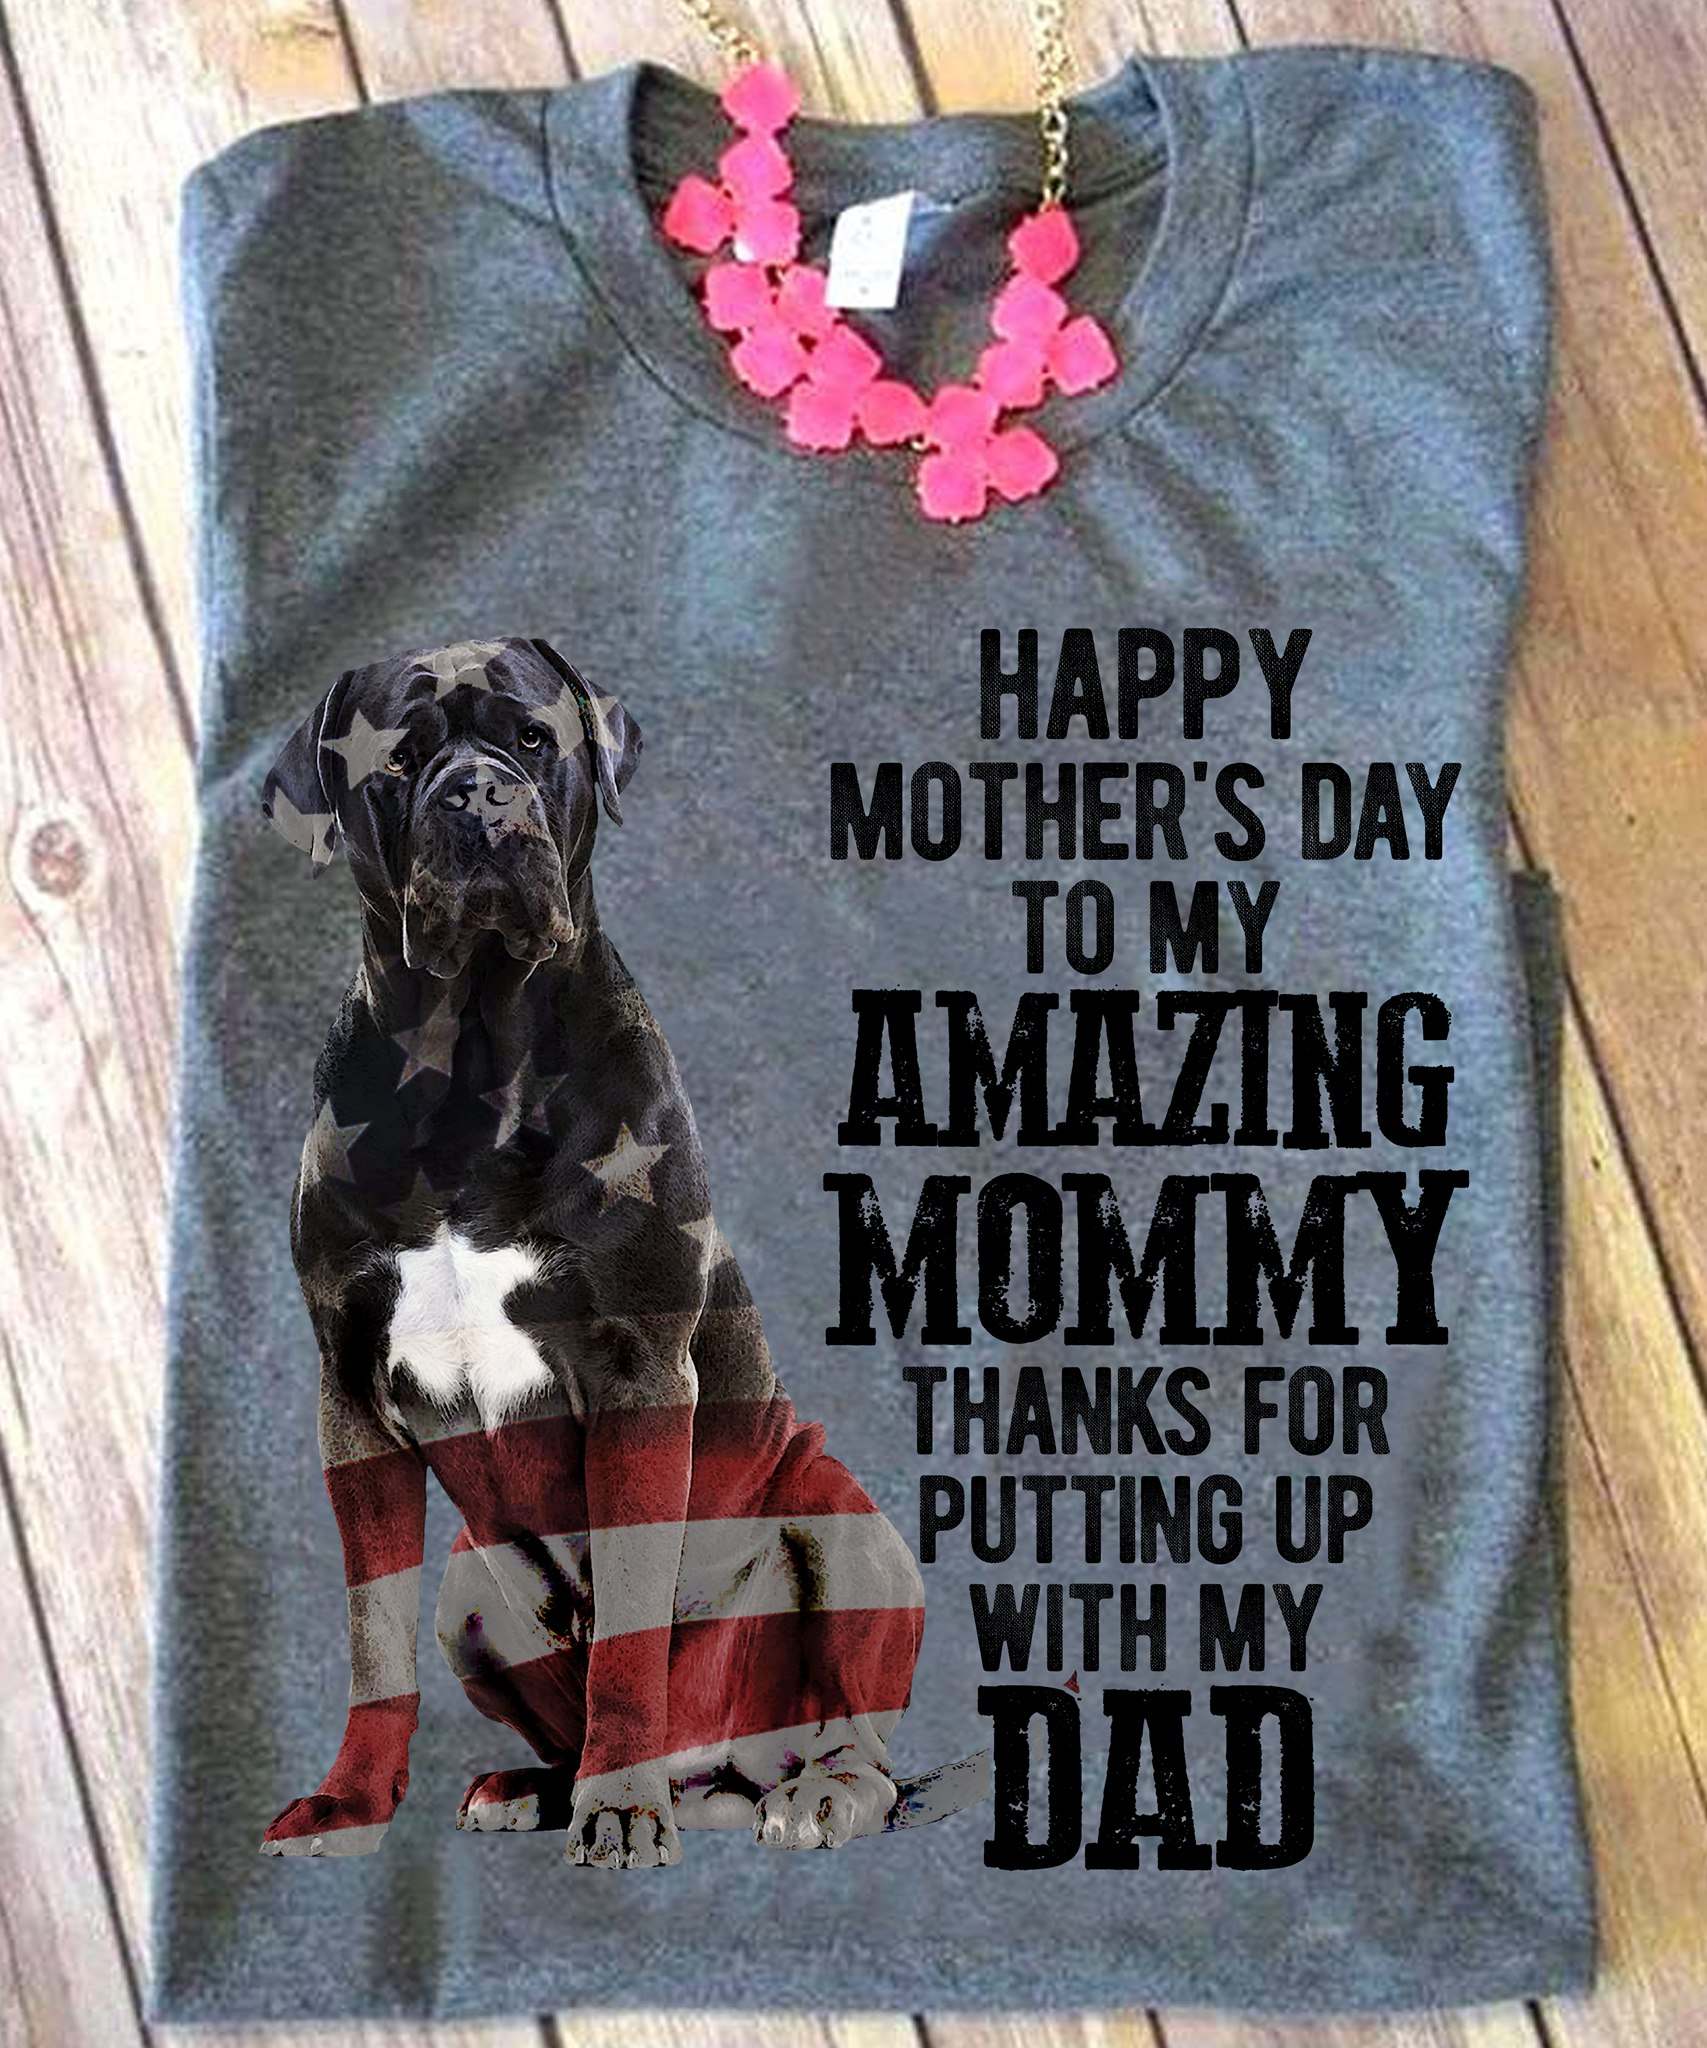 Happy mother's day to my amazing mommy thanks for putting up with my dad - Boxer breed dog